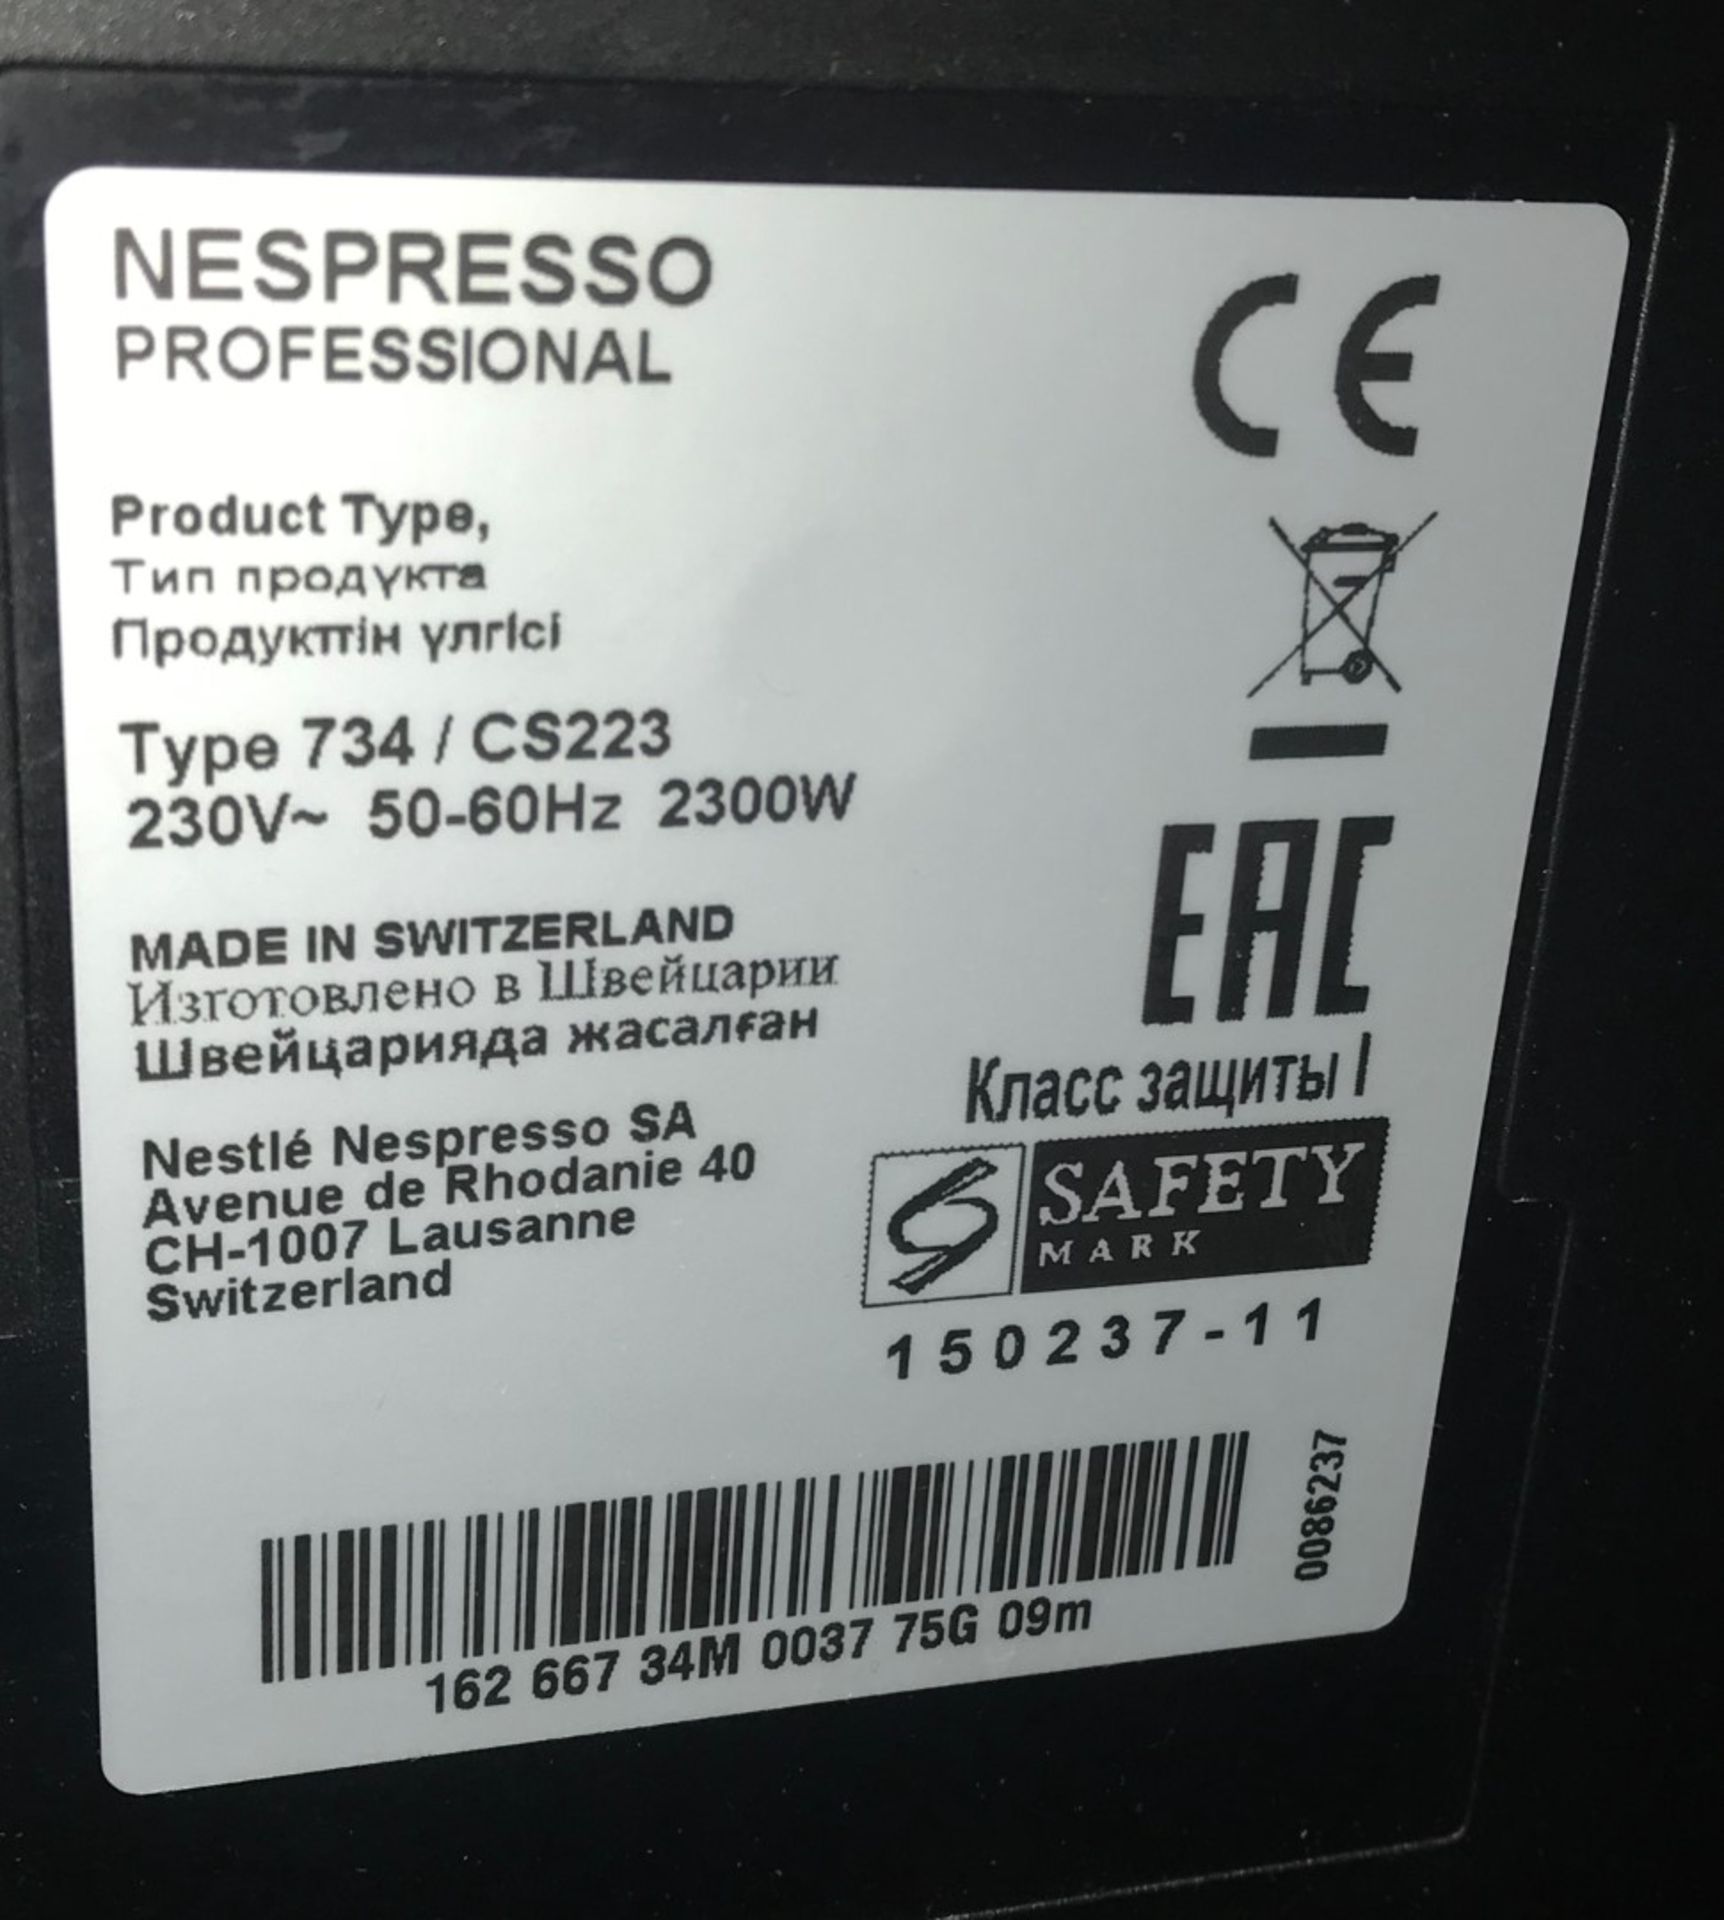 1 x Nespresso Gemini CS220 Pro Coffee Machine With Pod Holder and Pods - RRP £2,300 - Ref: RB275 - - Image 2 of 5